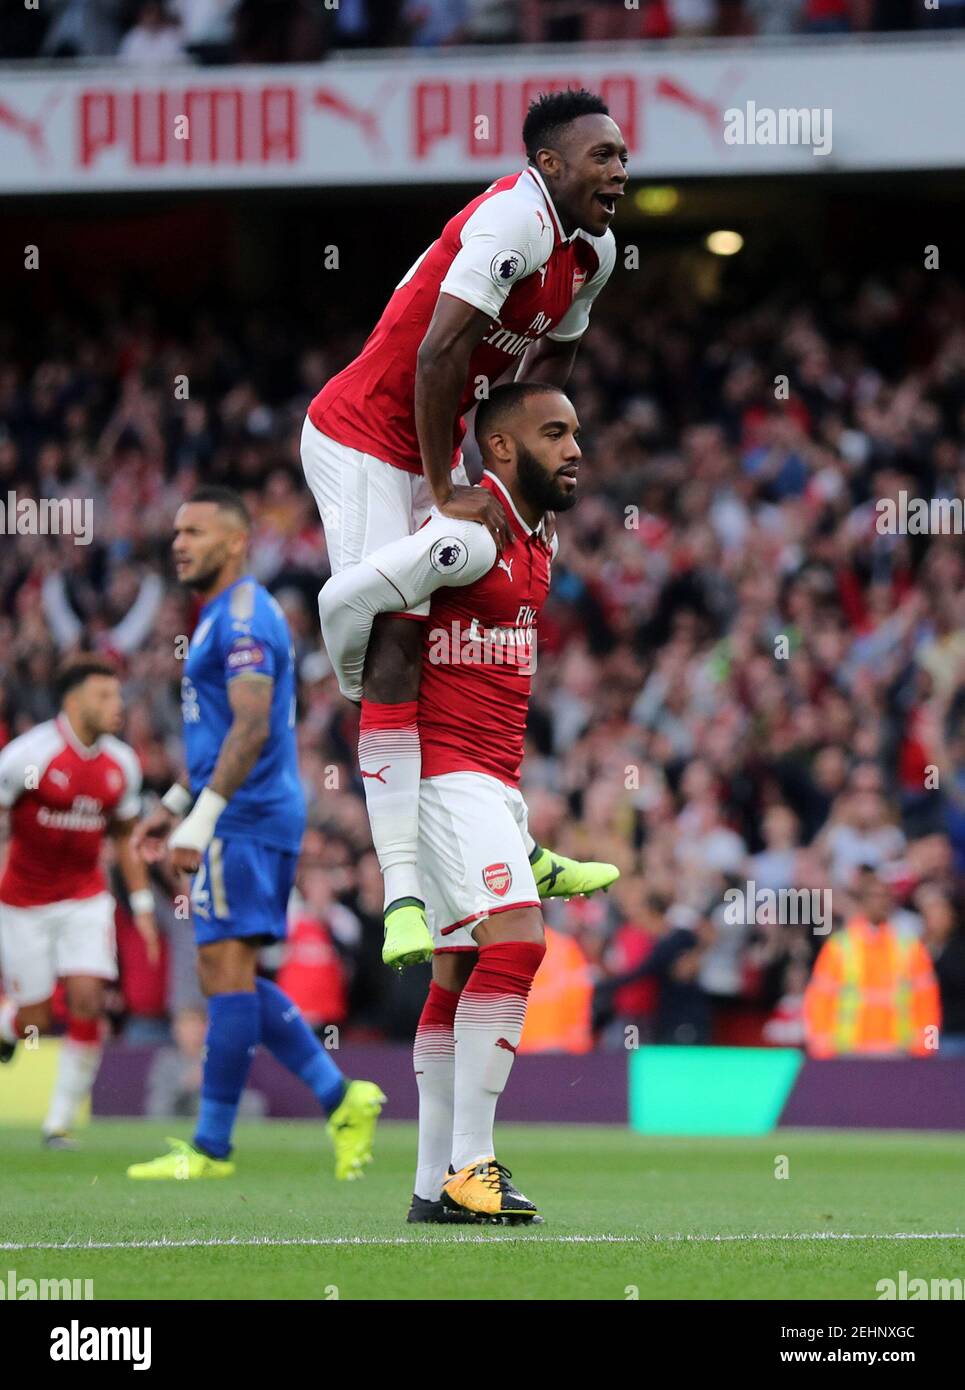 Football Soccer - Premier League - Arsenal vs Leicester City - London, Britain - August 11, 2017   Arsenal's Alexandre Lacazette celebrates scoring their first goal with Danny Welbeck   REUTERS/Eddie Keogh  EDITORIAL USE ONLY. No use with unauthorized audio, video, data, fixture lists, club/league logos or 'live' services. Online in-match use limited to 45 images, no video emulation. No use in betting, games or single club/league/player publications. Please contact your account representative for further details.? Stock Photo